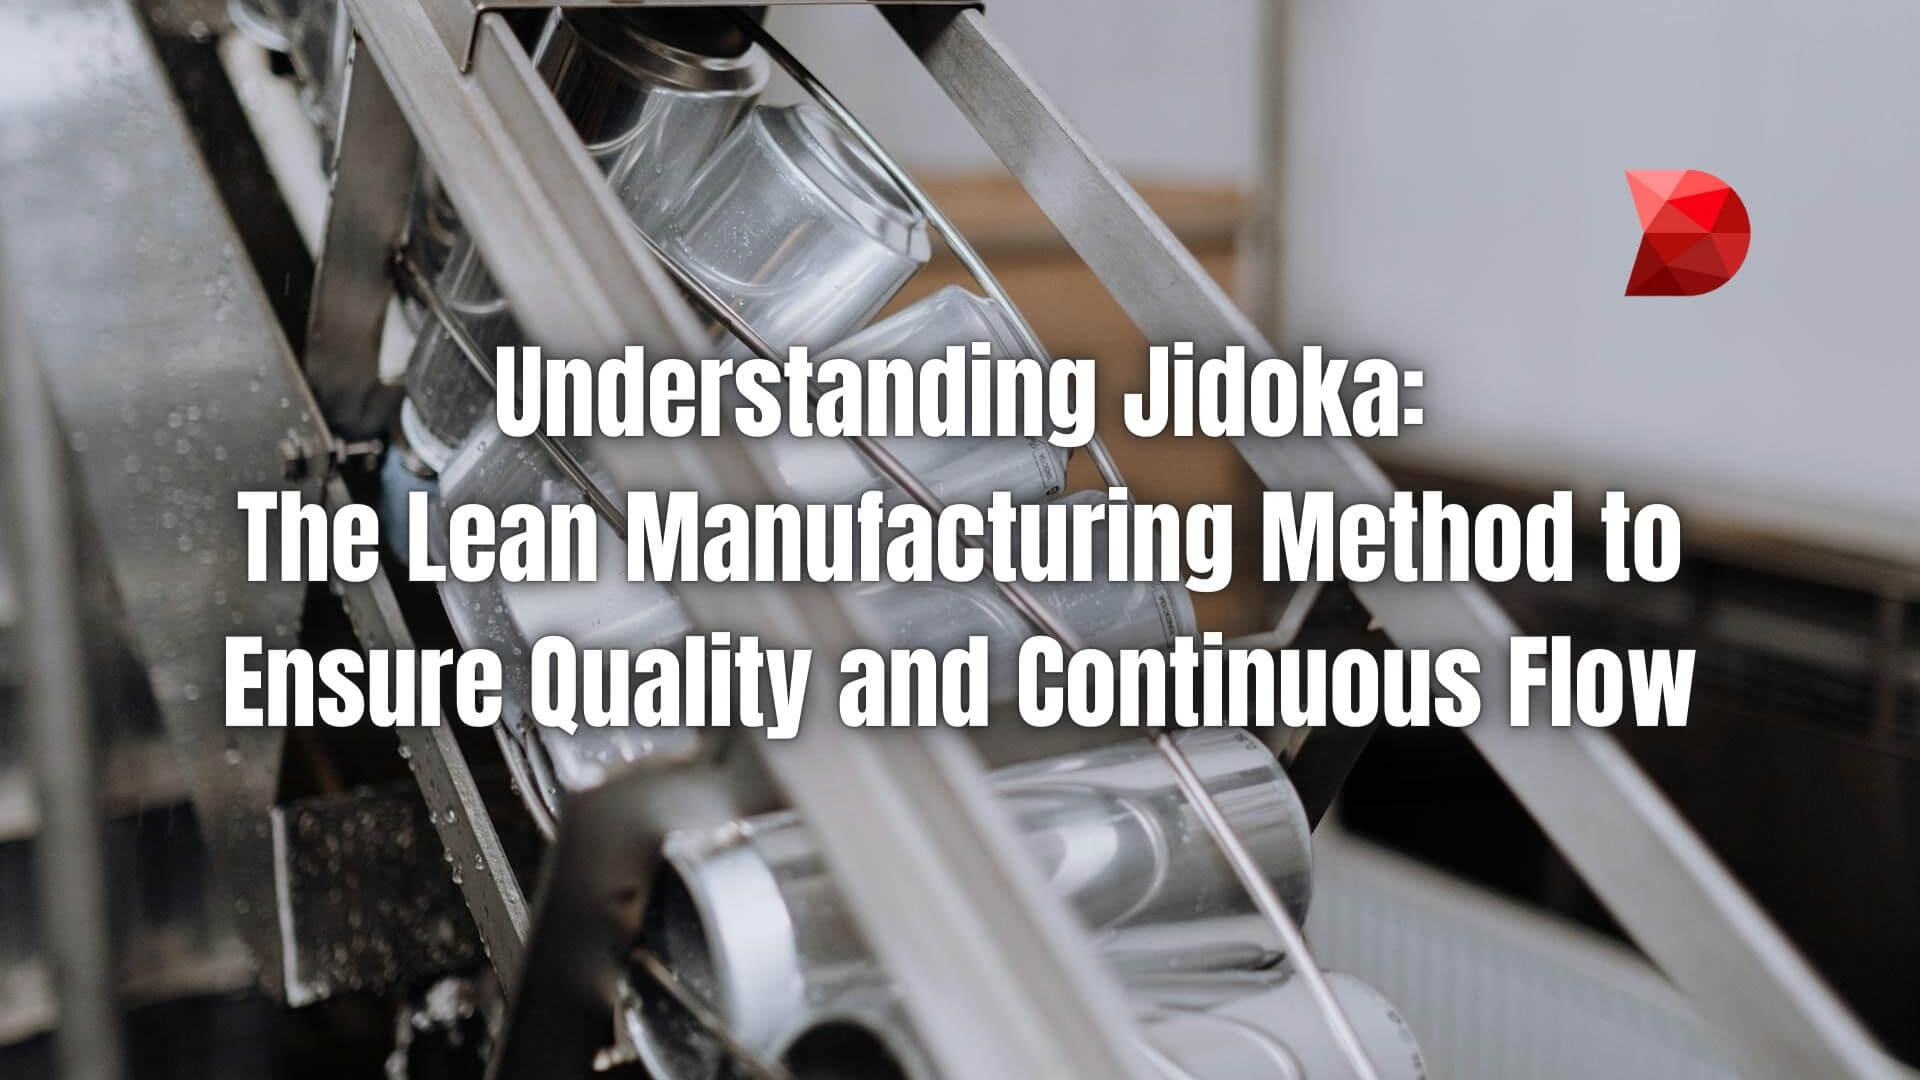 Unlock the secrets of Jidoka with our full guide to lean manufacturing. Learn how to ensure quality and continuous flow effortlessly.